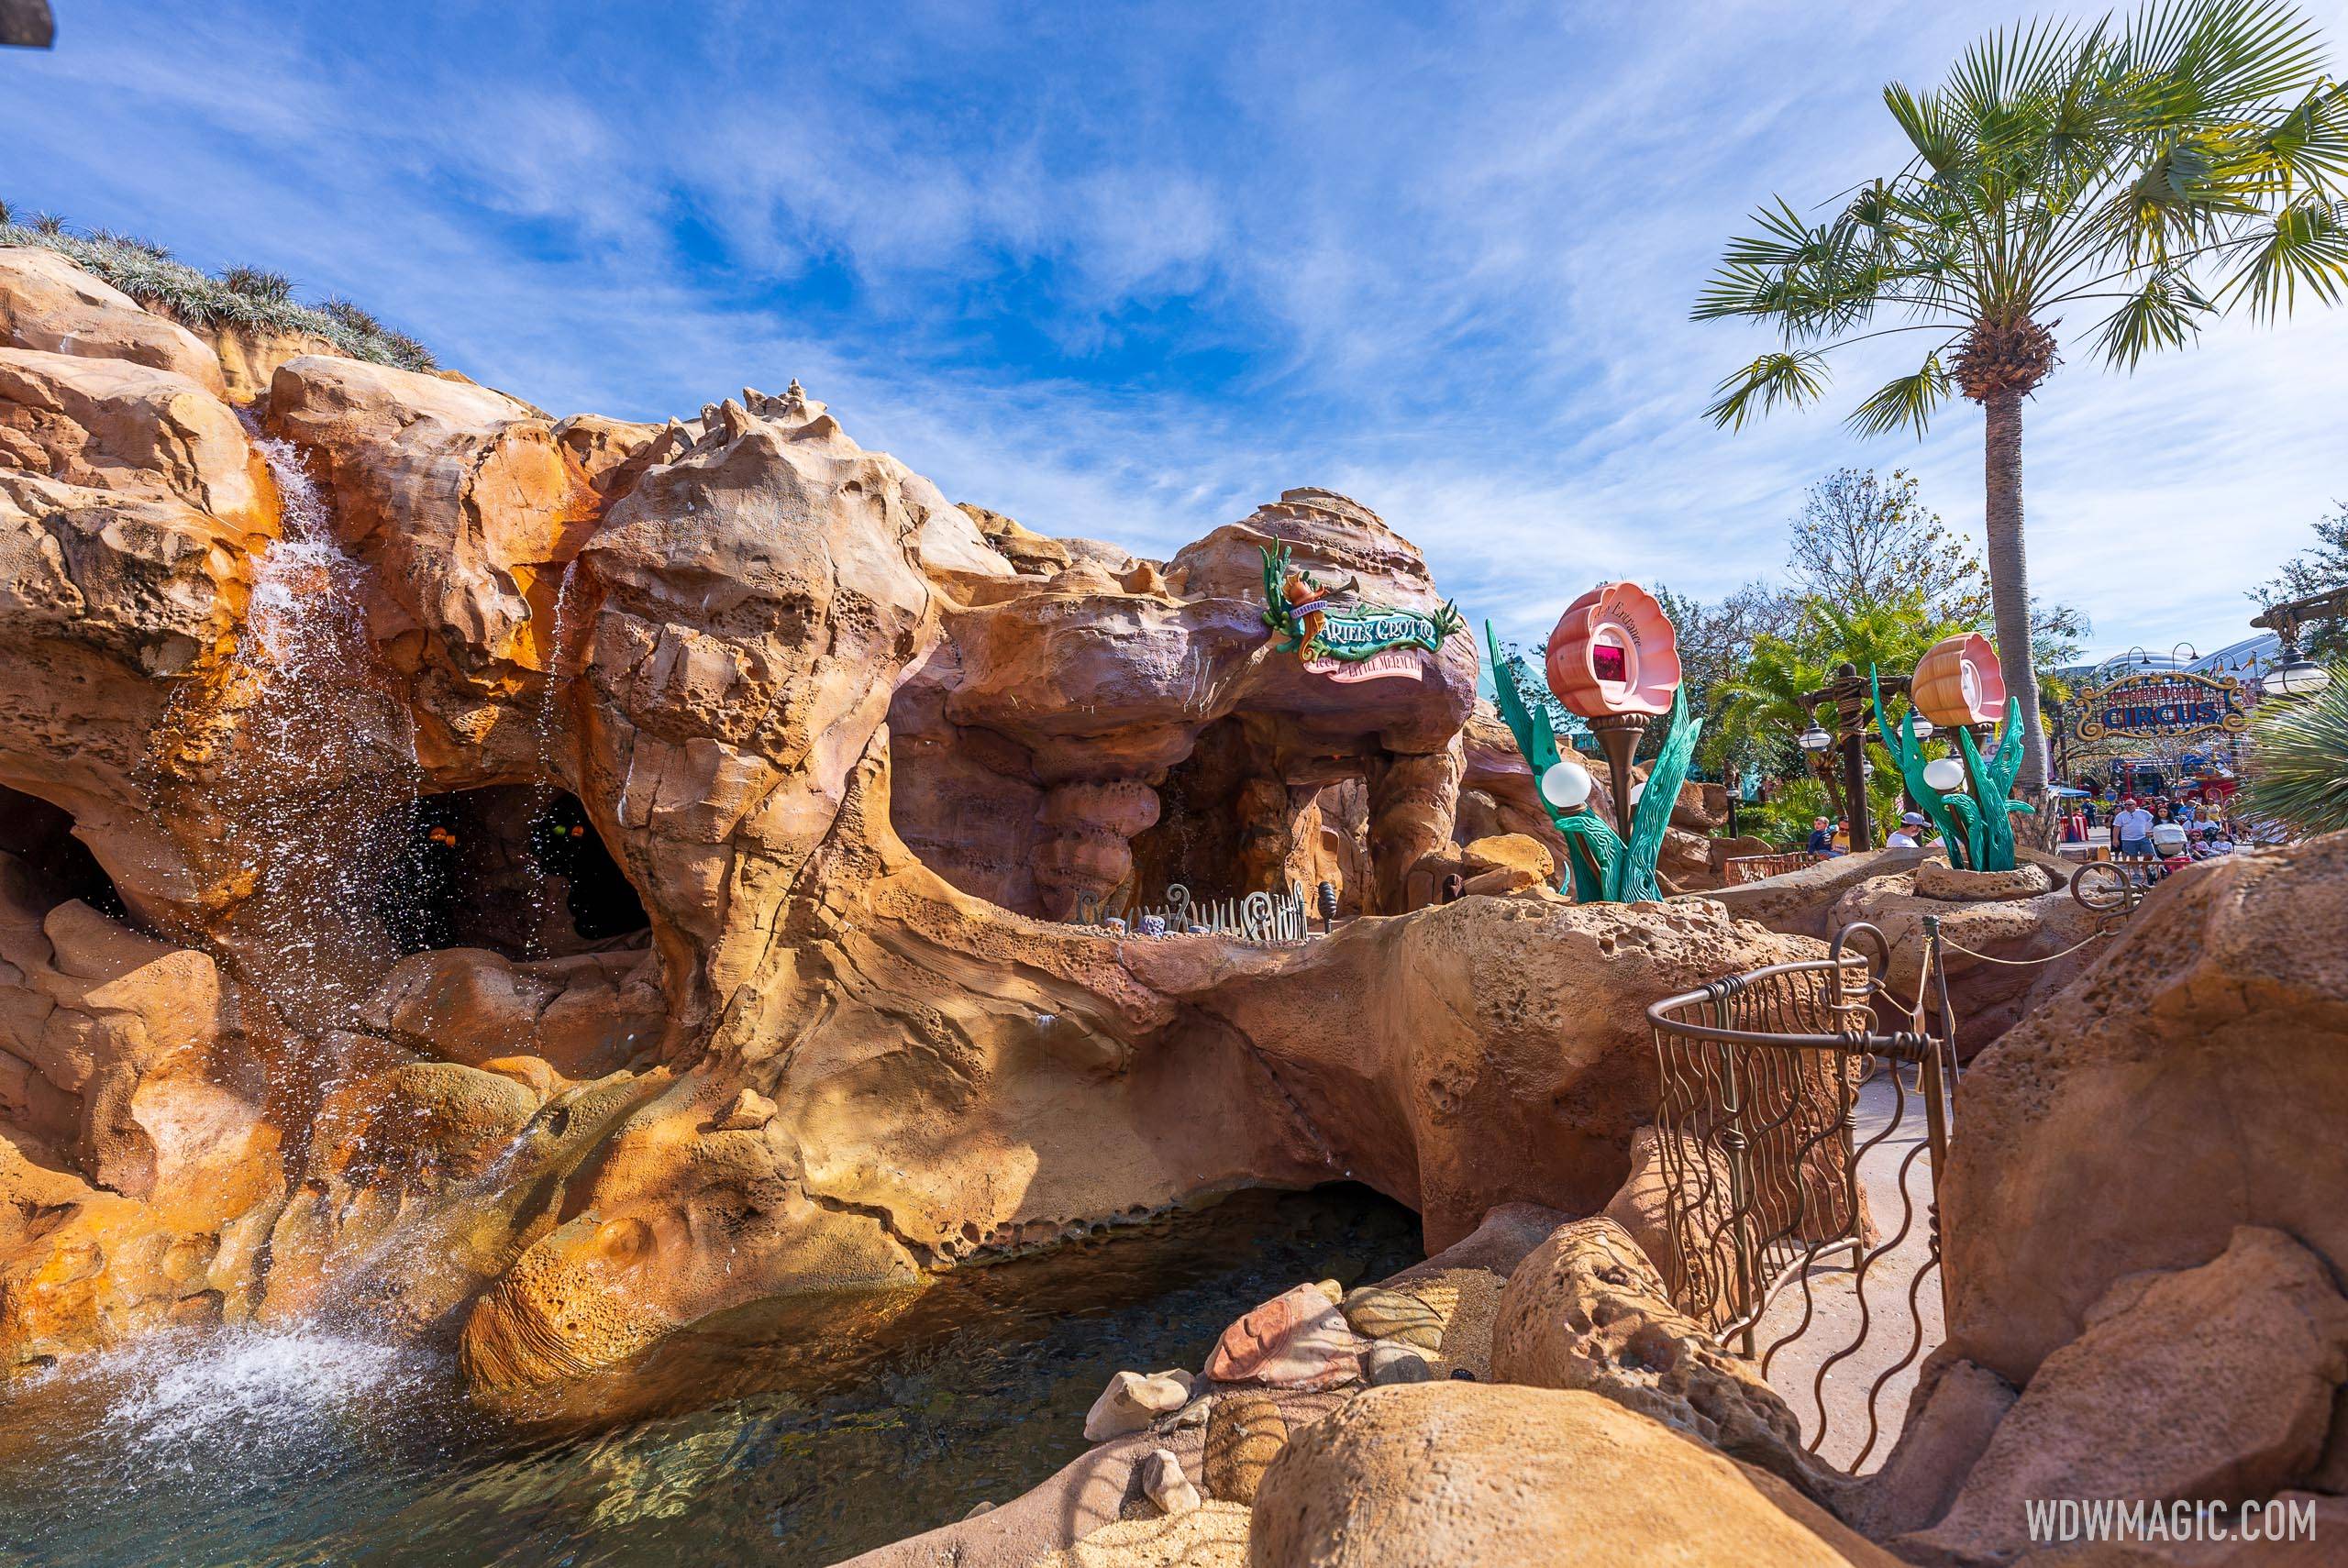 Ariel's Grotto added to the Lightning Lane line-up at Magic Kingdom